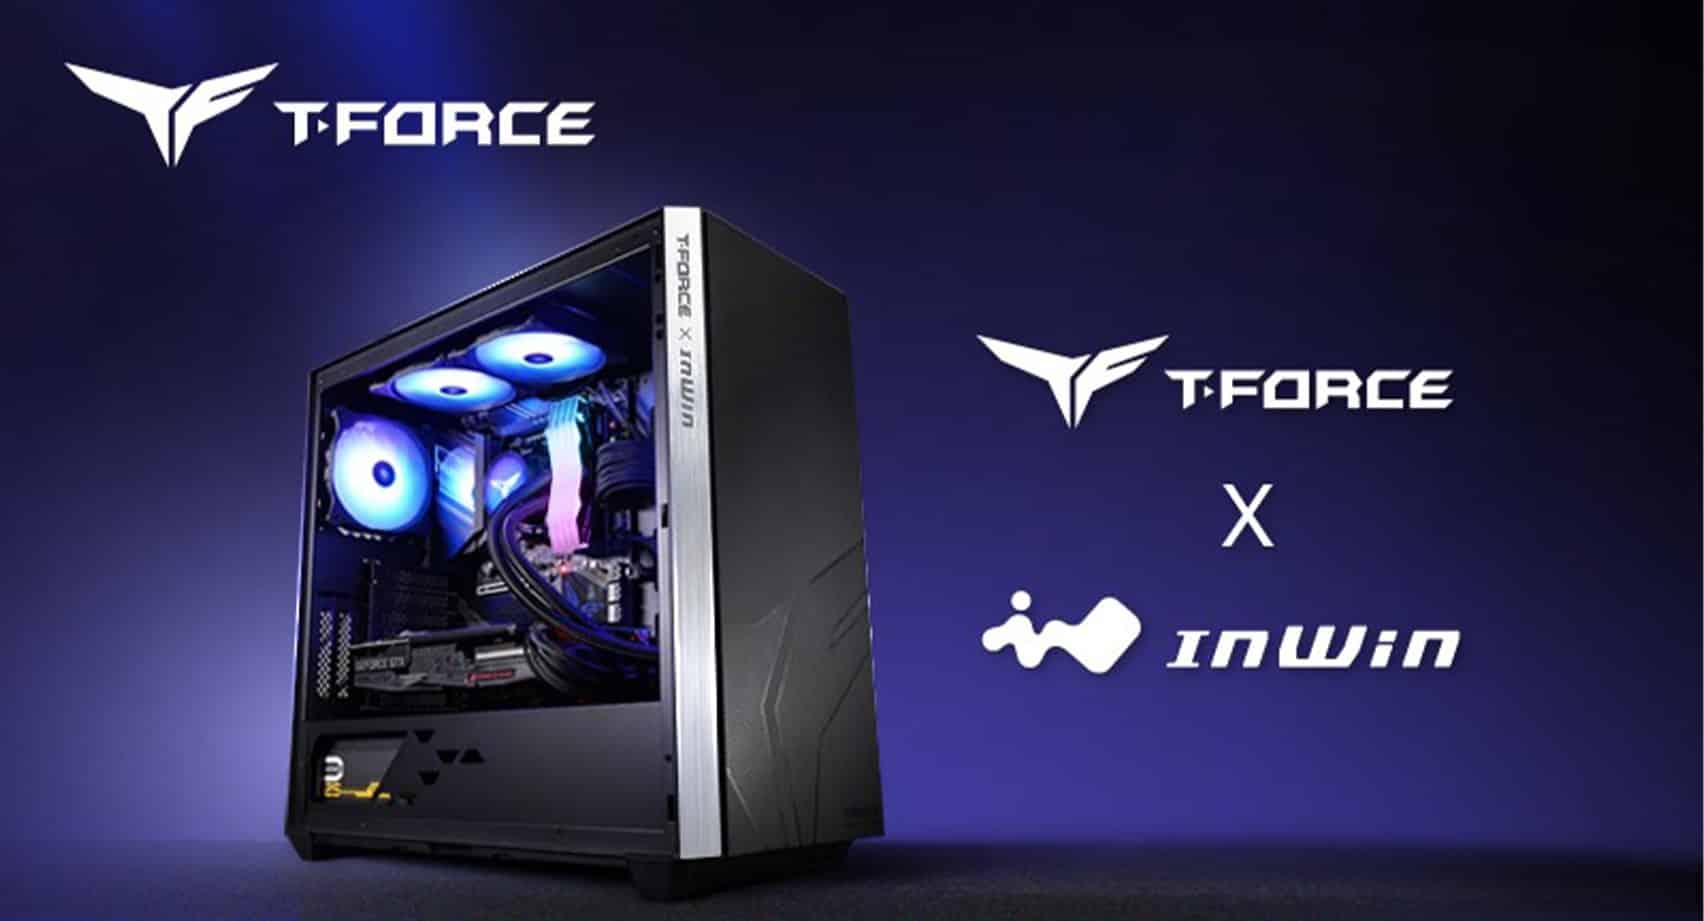 TEAMGROUP anuncia el primer case T-FORCE x InWin 216, GamersRD